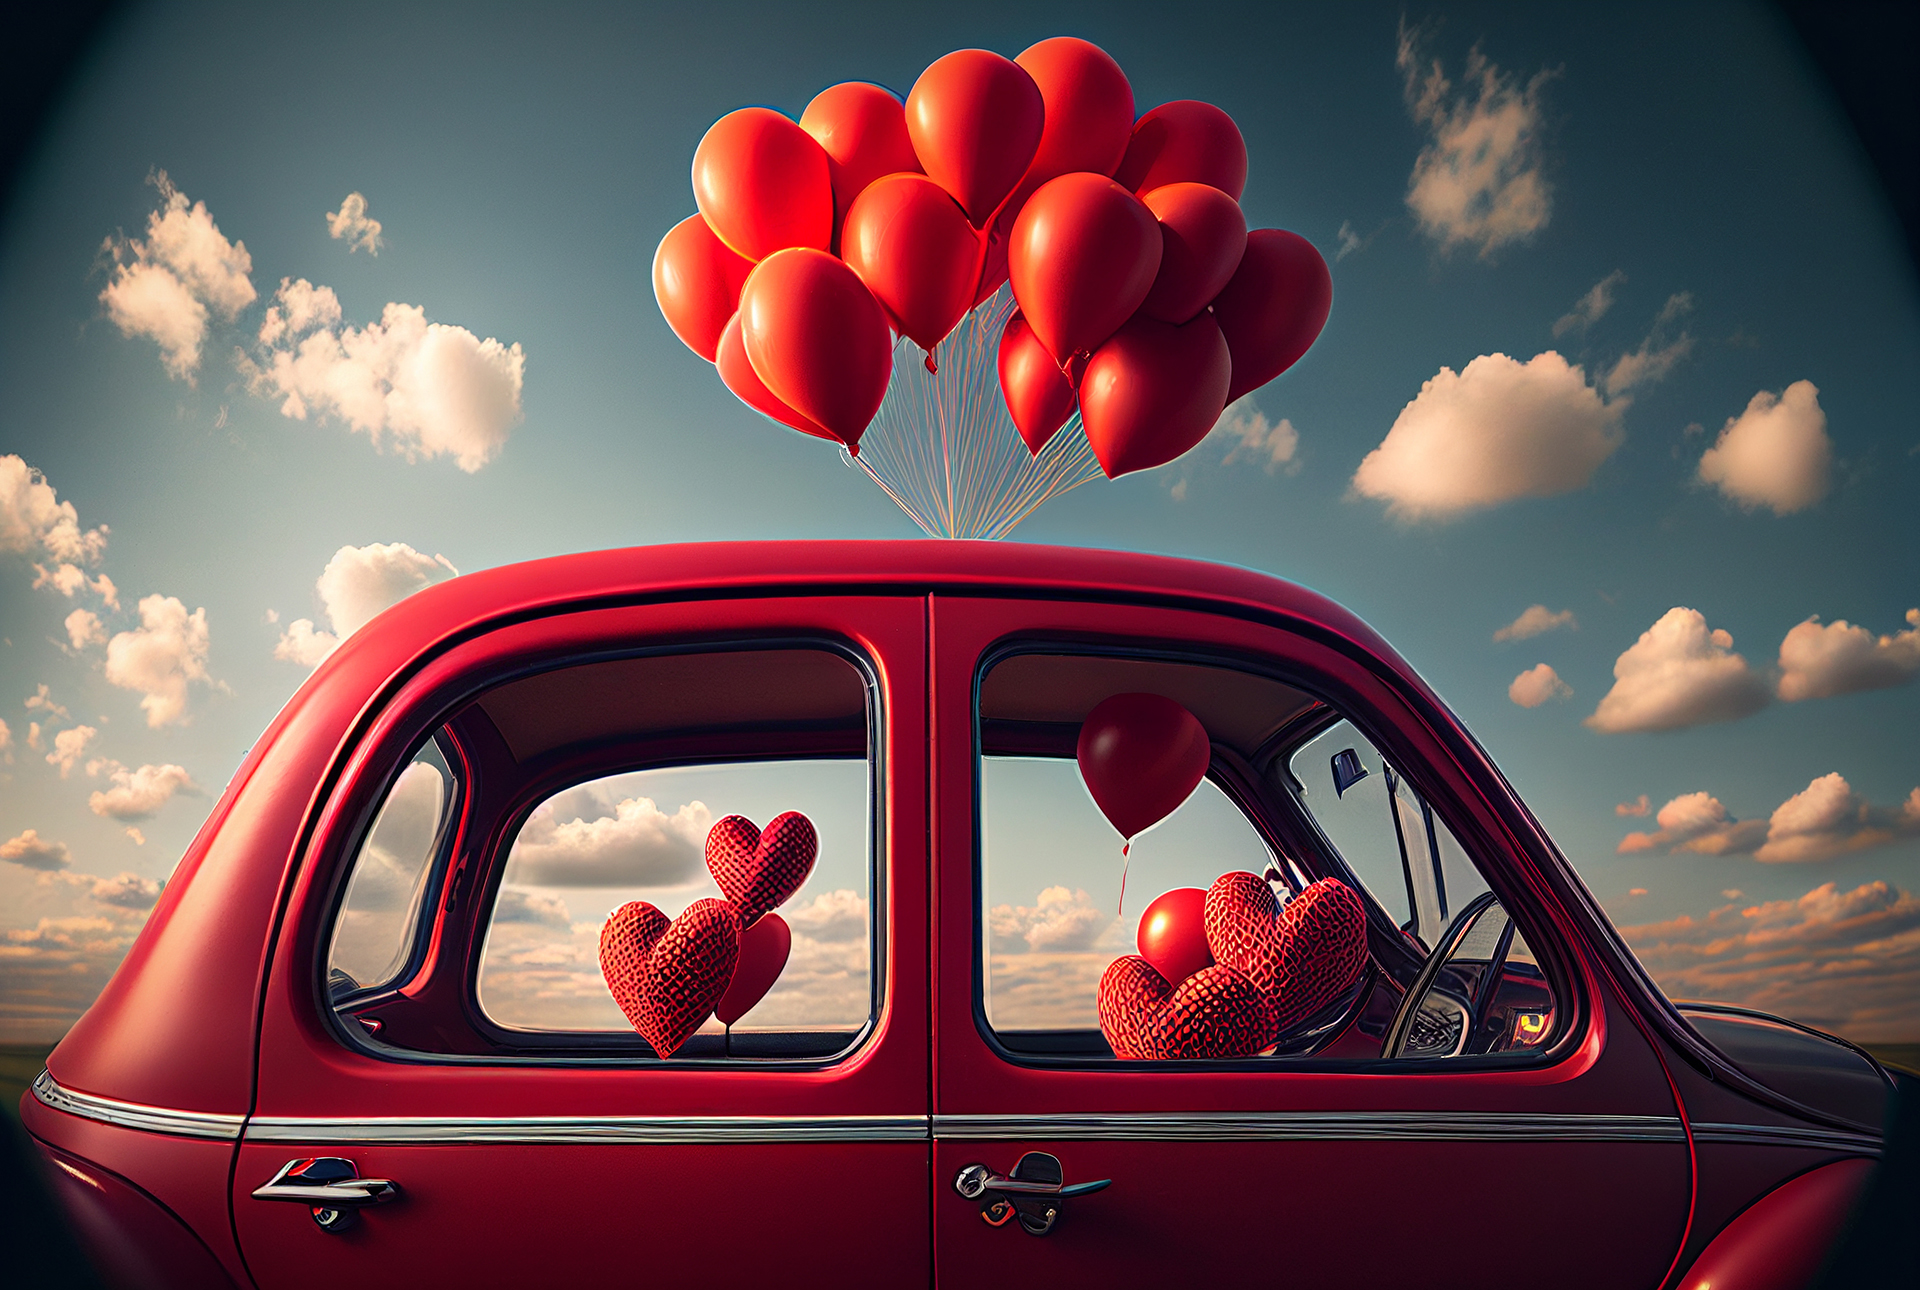 A Bunch of Valentines Day Heart Balloons Attached to a Small Red Delivery Car